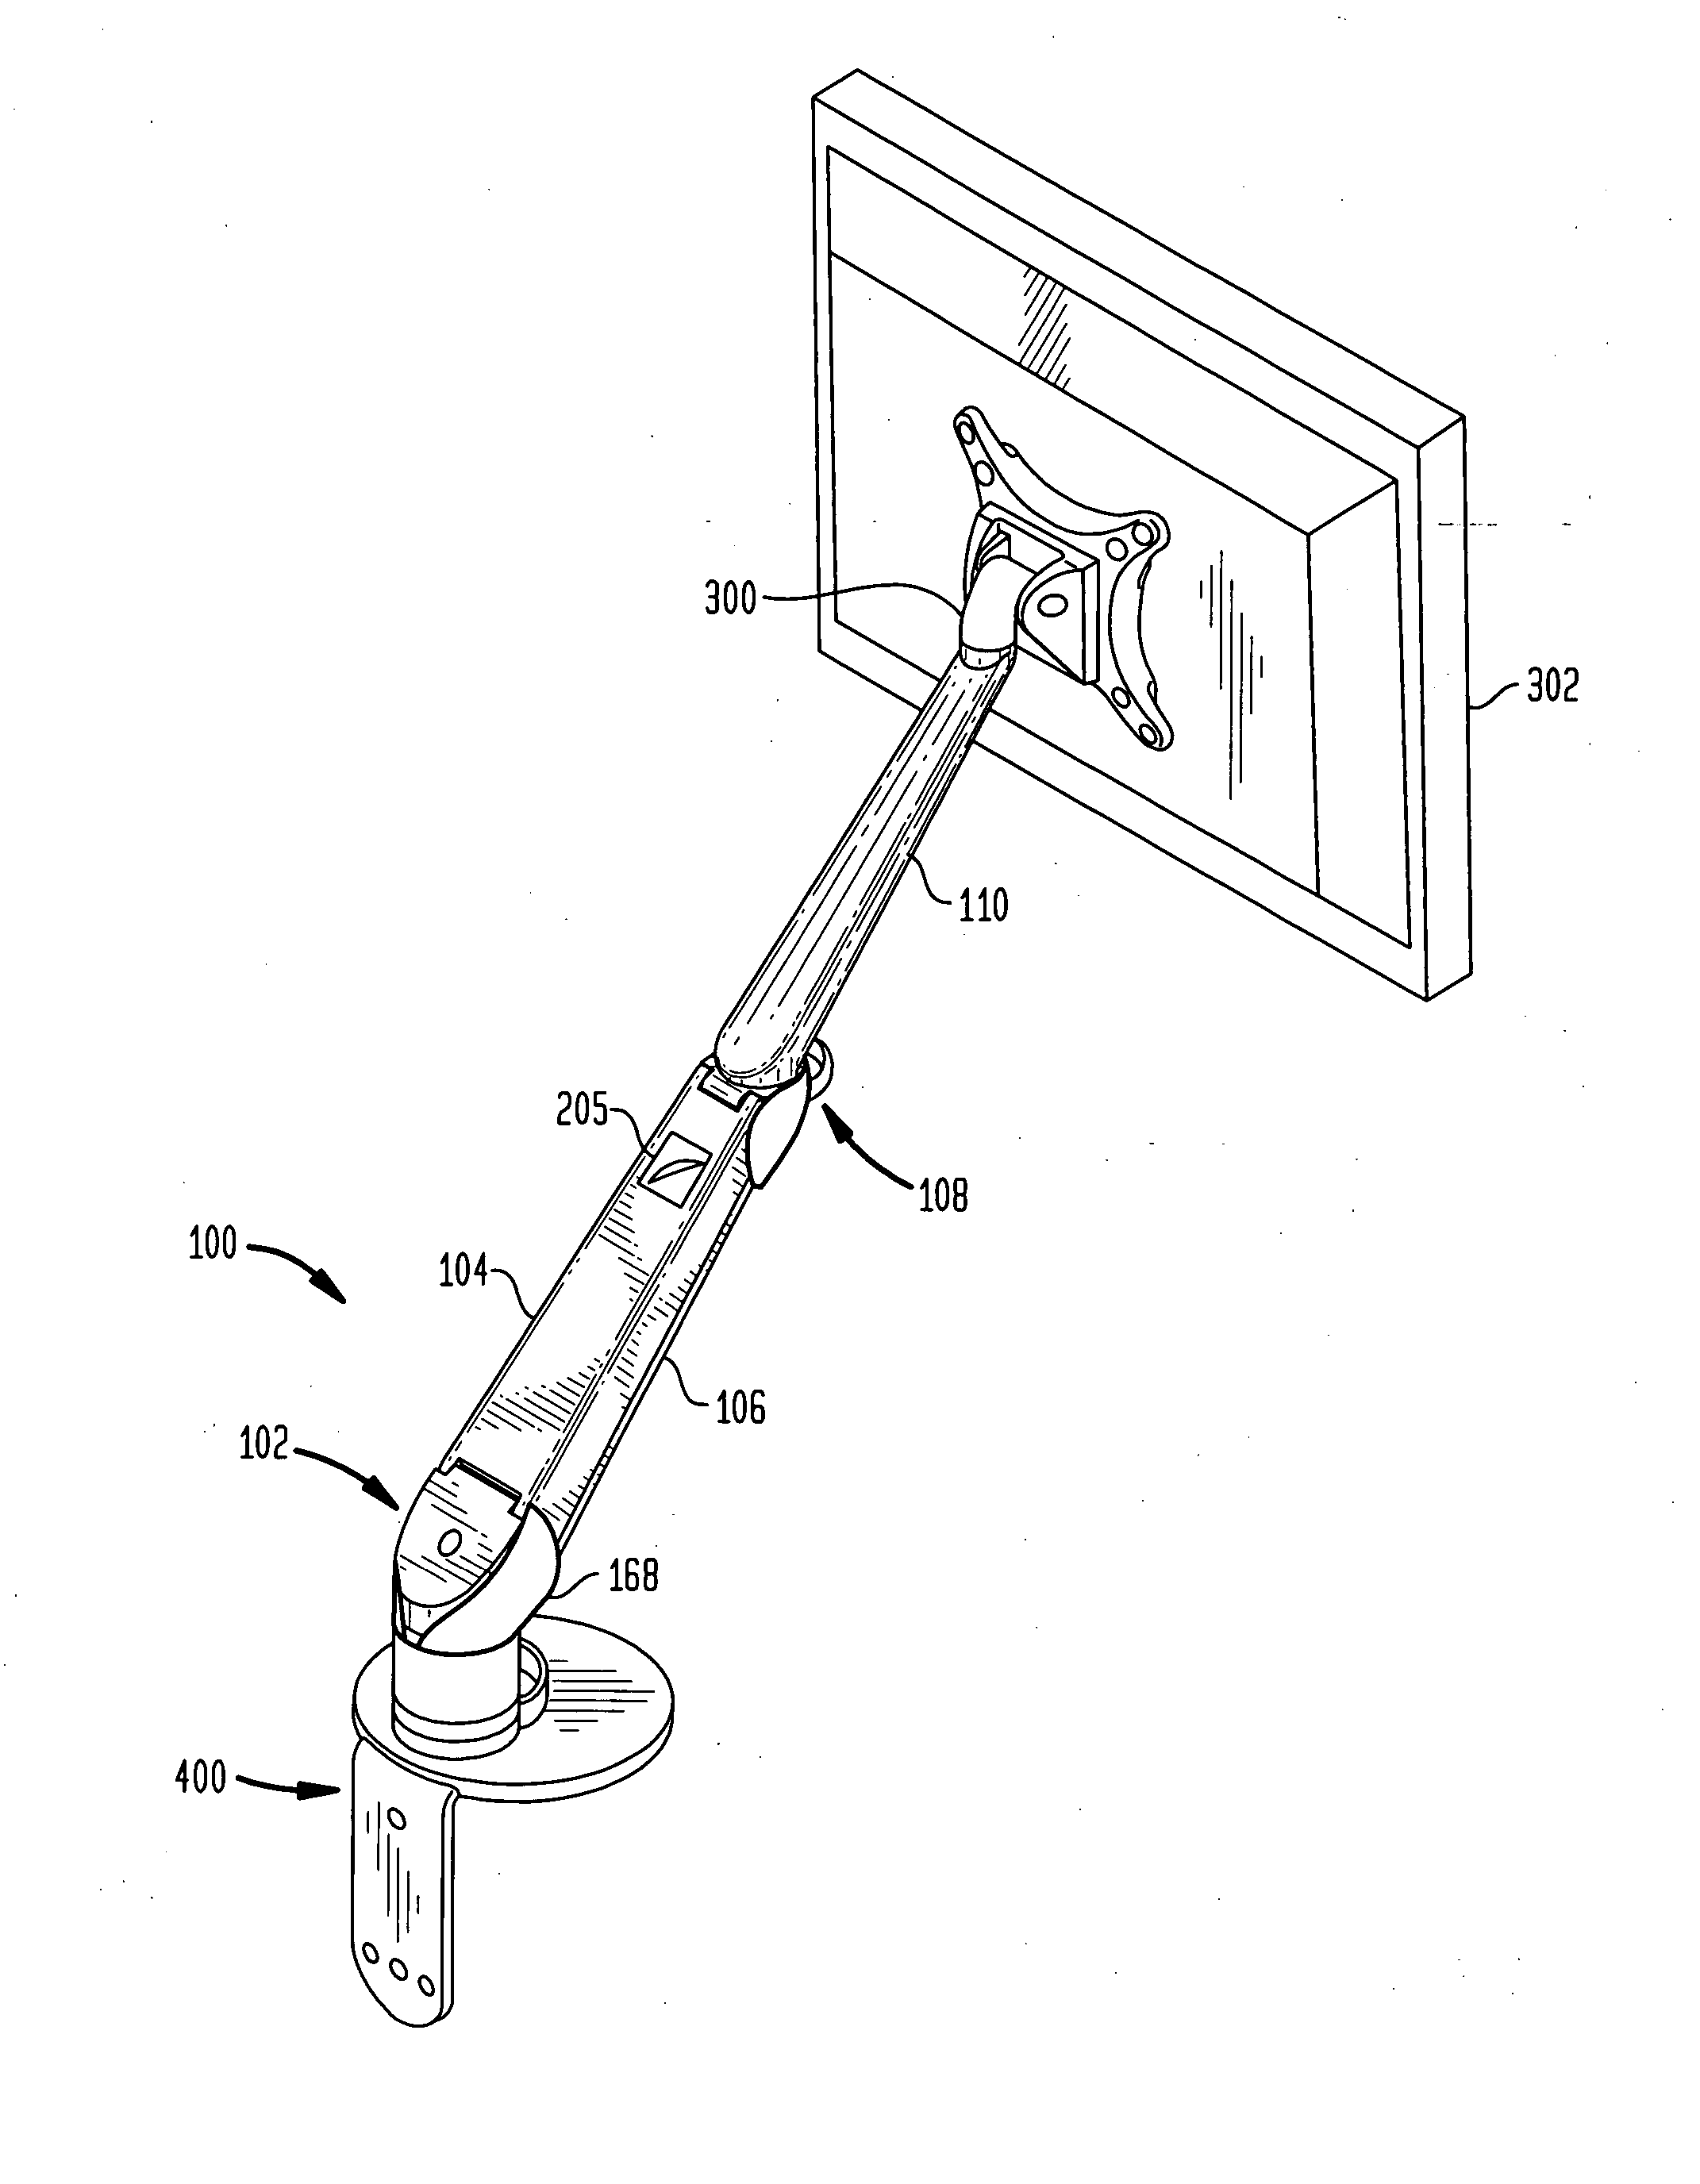 Angled mini arm having a clevis assembly